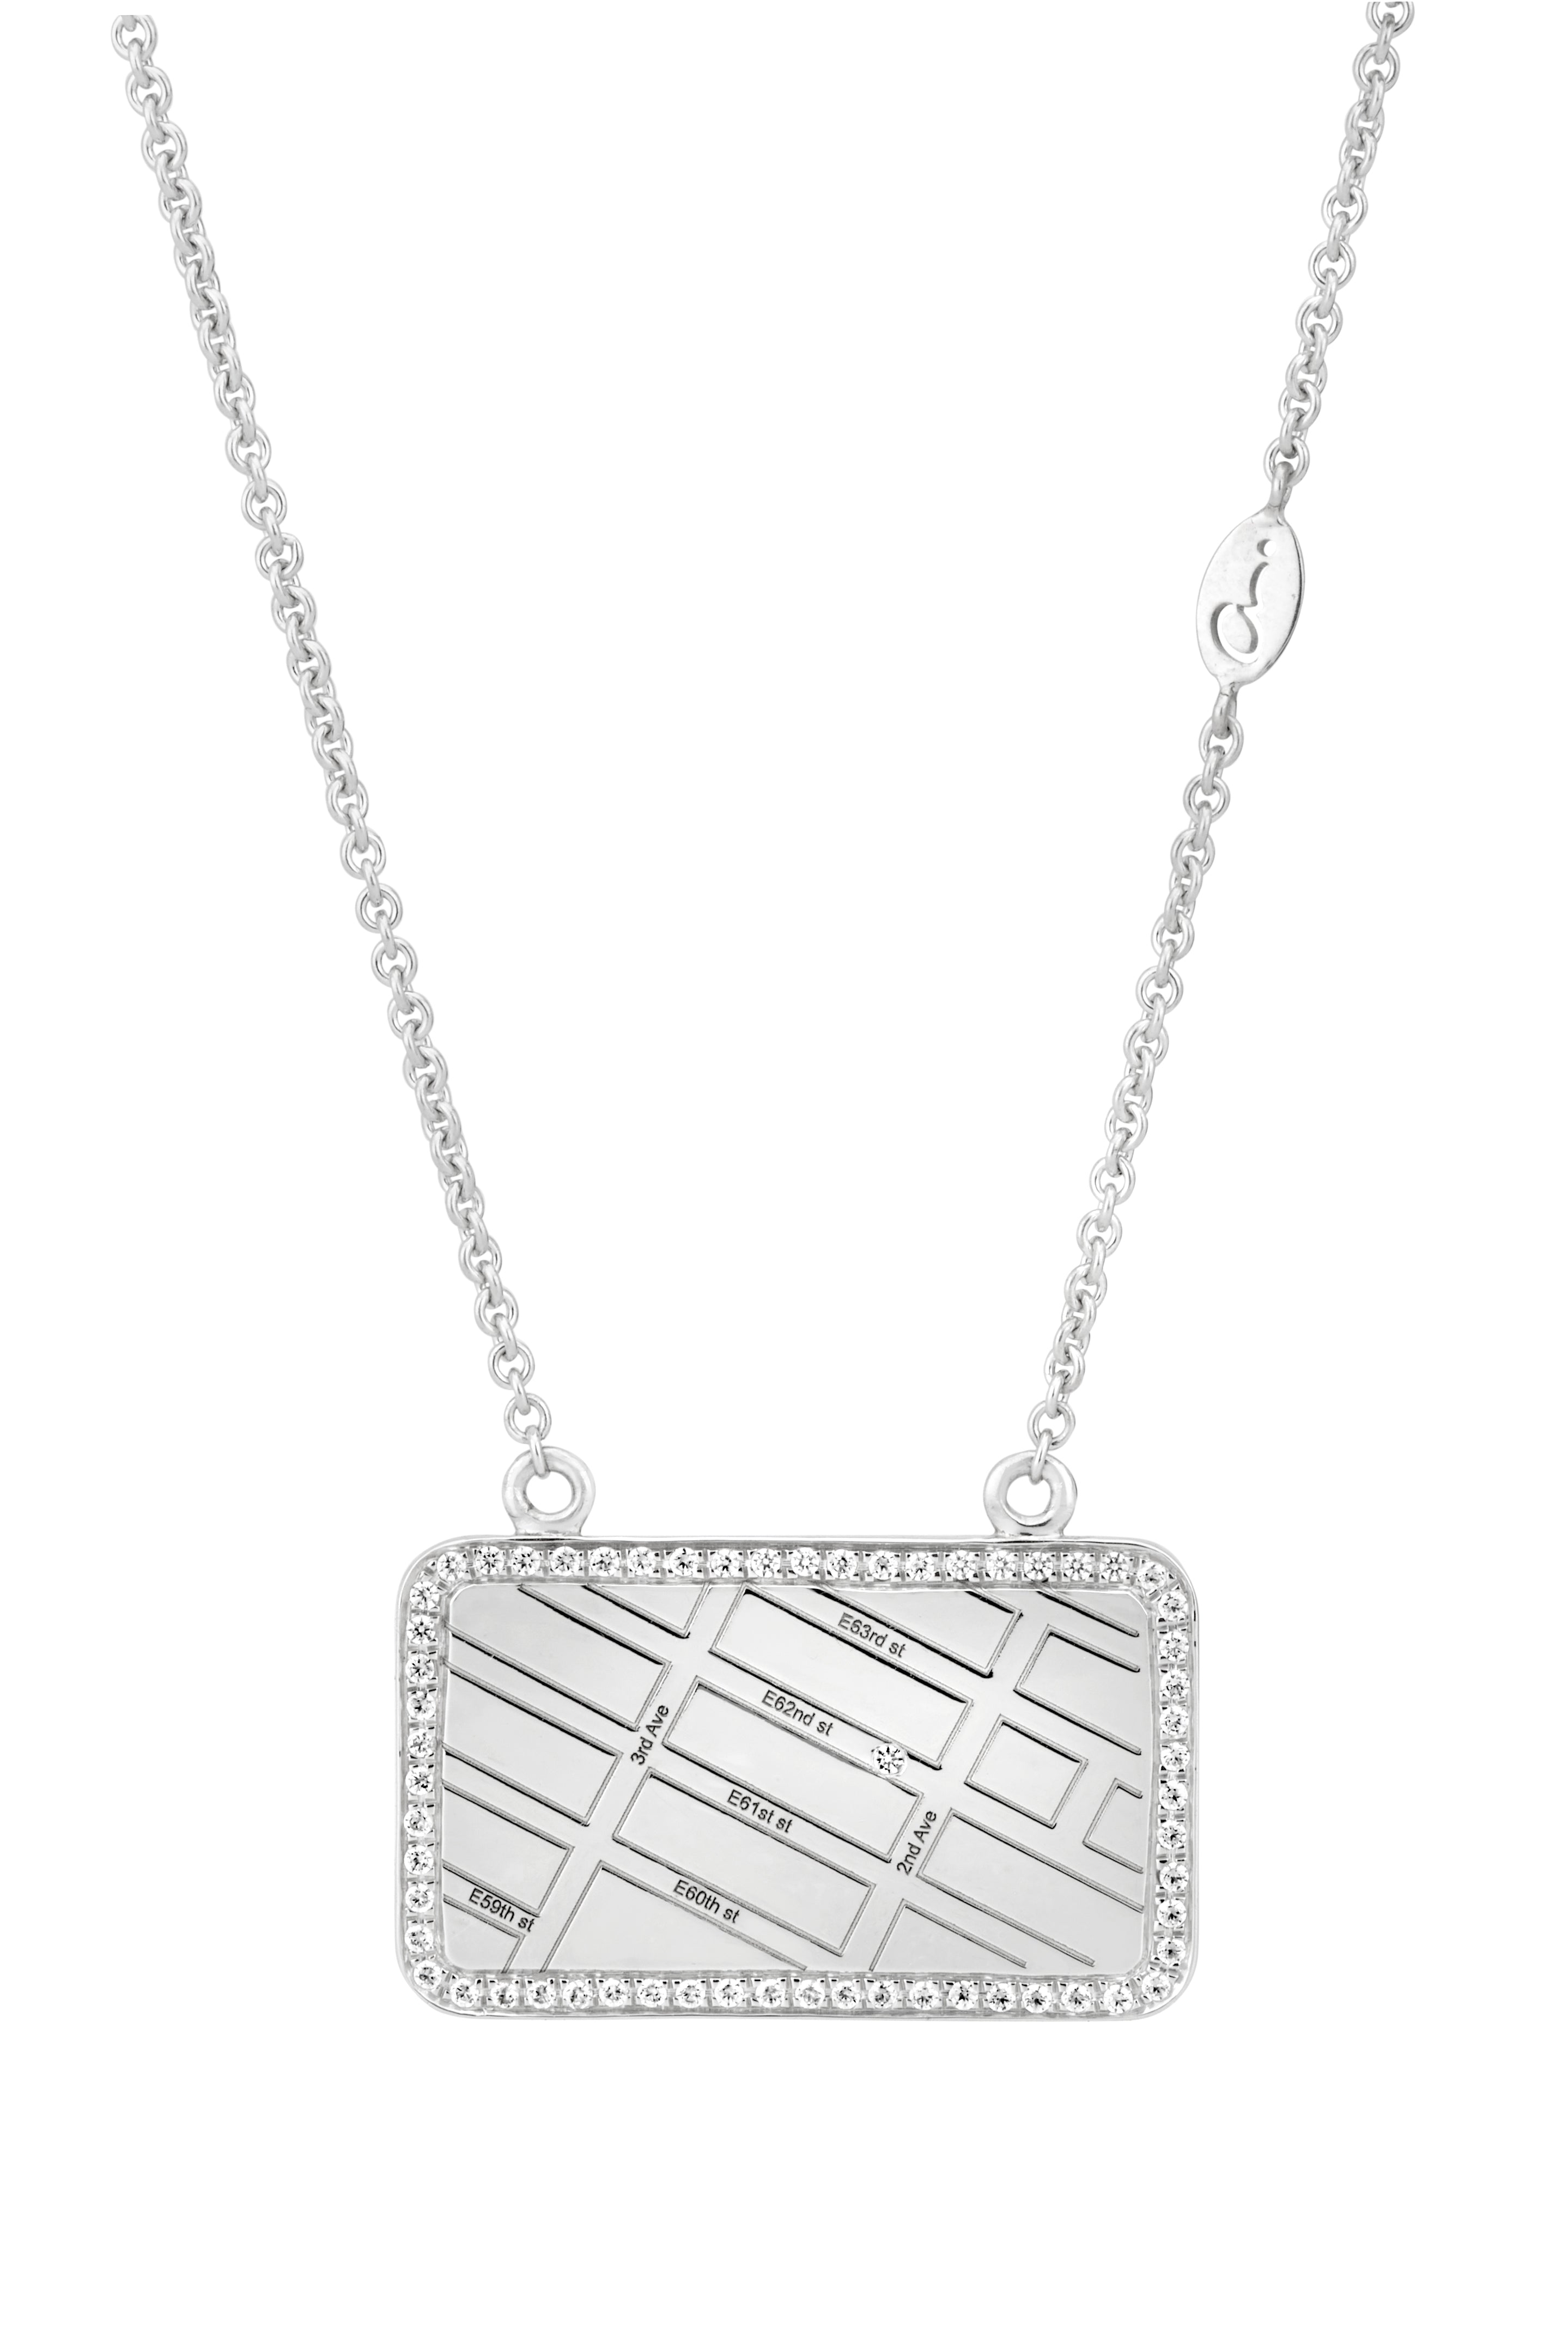 A.JAFFE  STERLING SILVER MAP NECKLACE WITH DIAMONDS